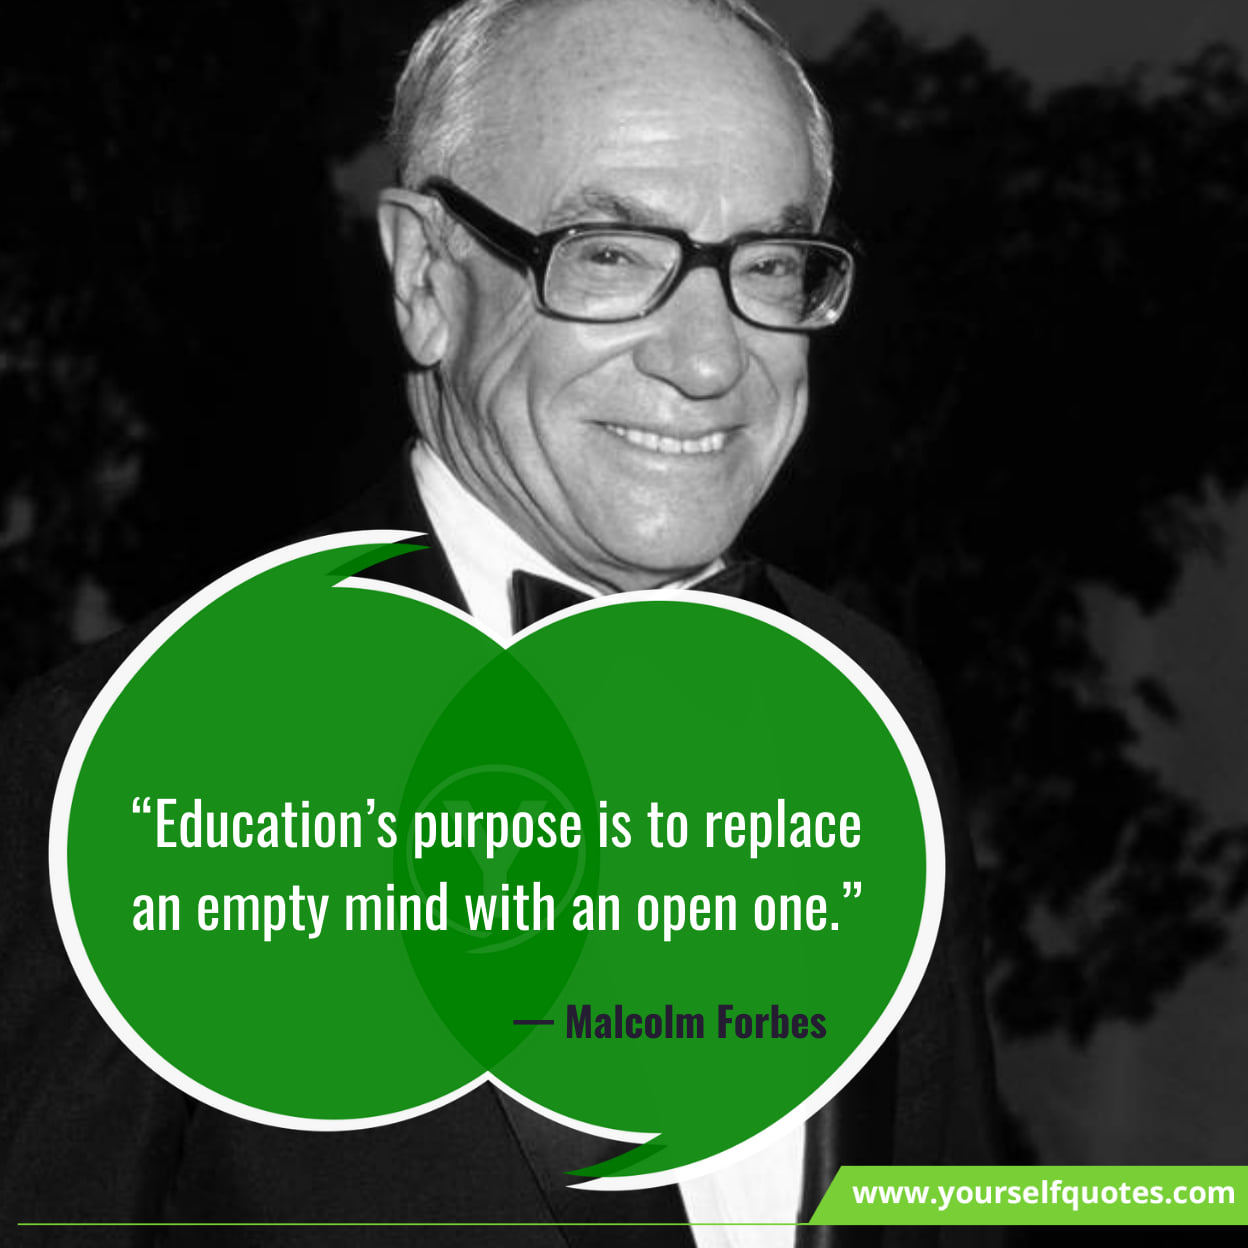 Motivational Quotes On Education